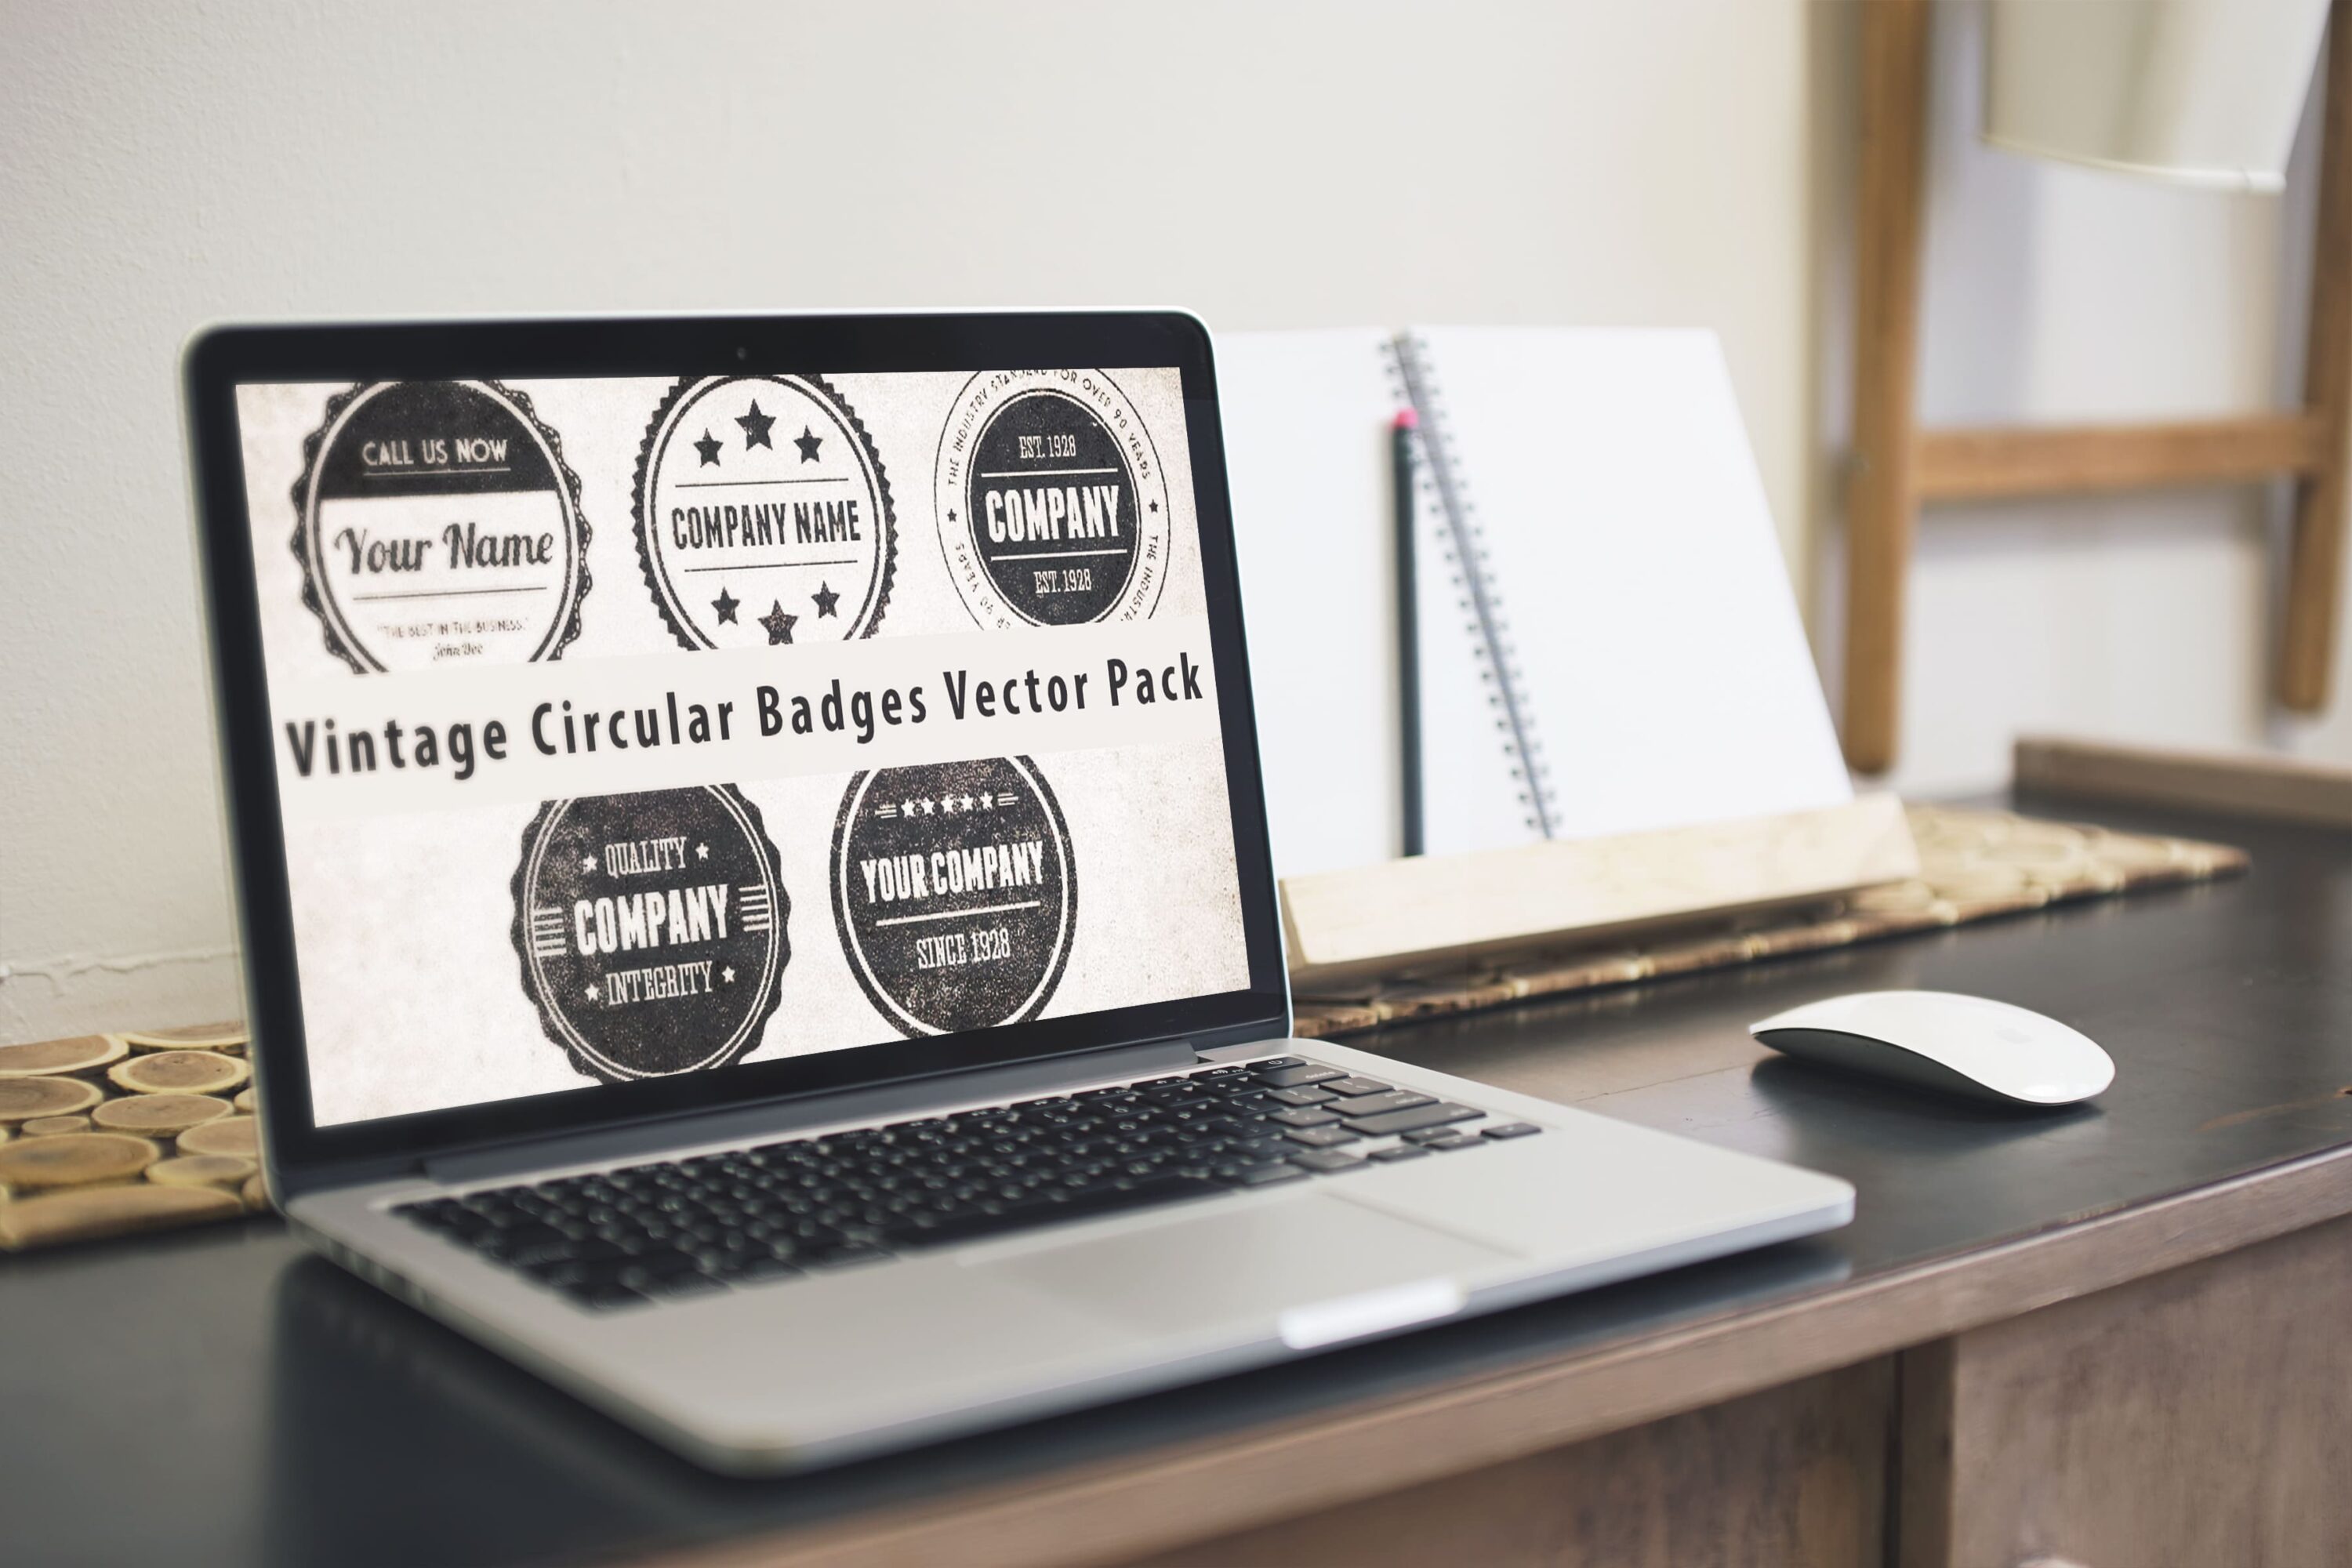 Laptop option of the Vintage Circular Badges Vector Pack.